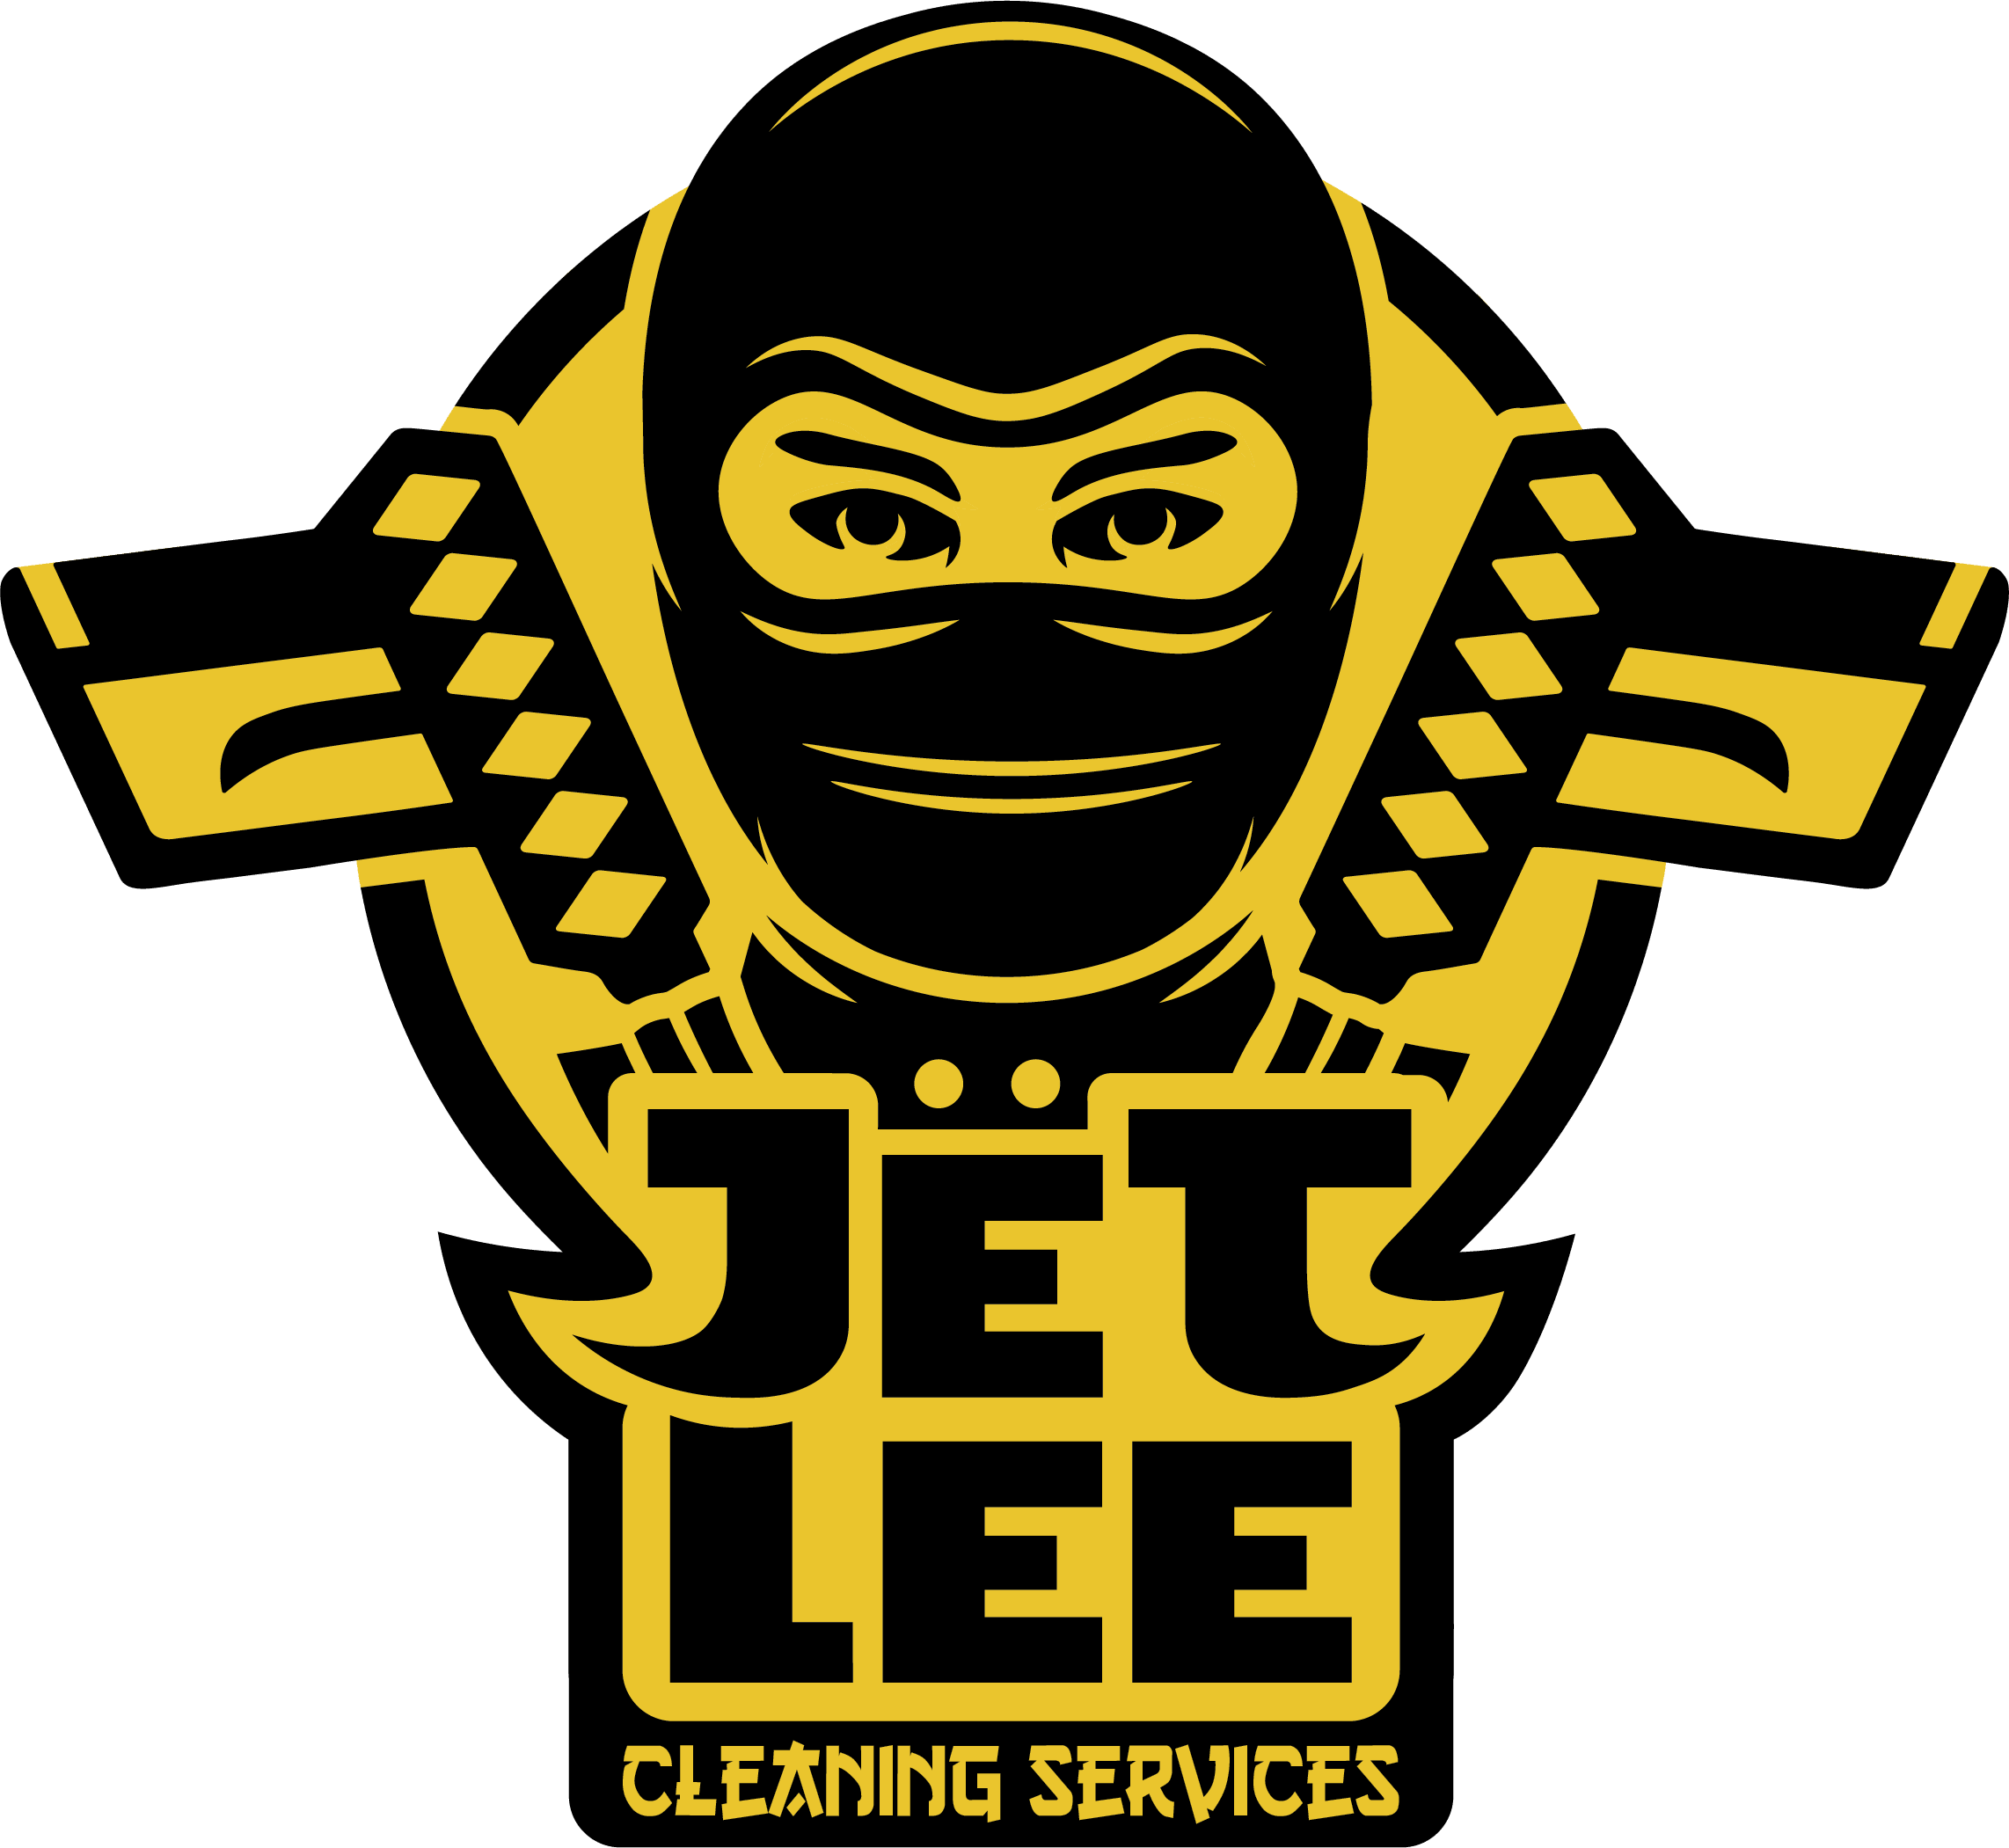 Jet Lee Cleaning Services